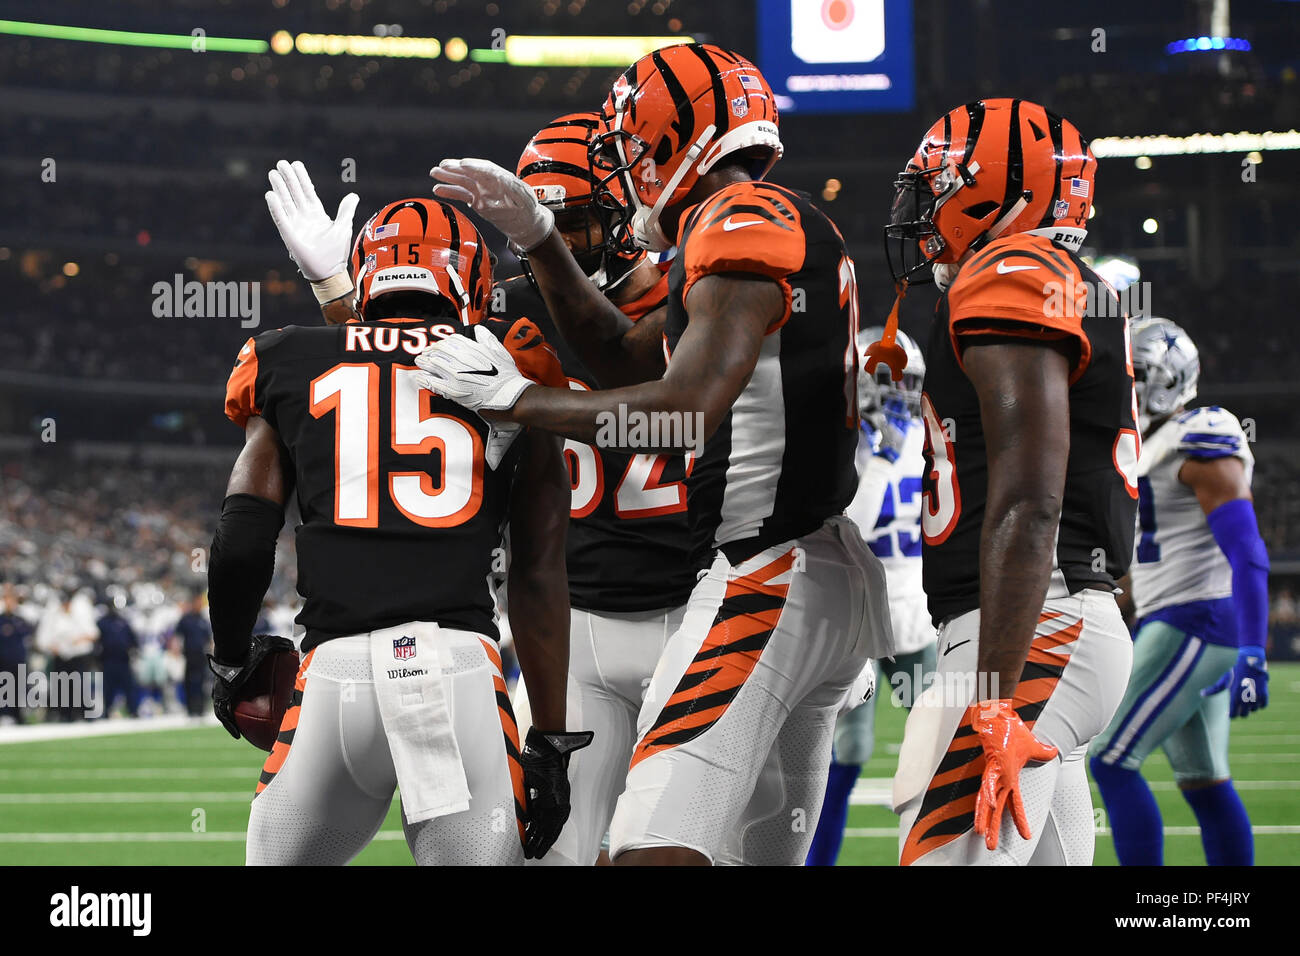 Texas, USA. 18 August 2018. Cincinnati Bengals wide receiver John Ross (15) celebrates with his team after catching a two-point conversion during the NFL football game between the Cincinnati Bengals and the Dallas Cowboys at AT&T Stadium in Arlington, Texas. Shane Roper/Cal Sport Media Credit: Cal Sport Media/Alamy Live News Stock Photo